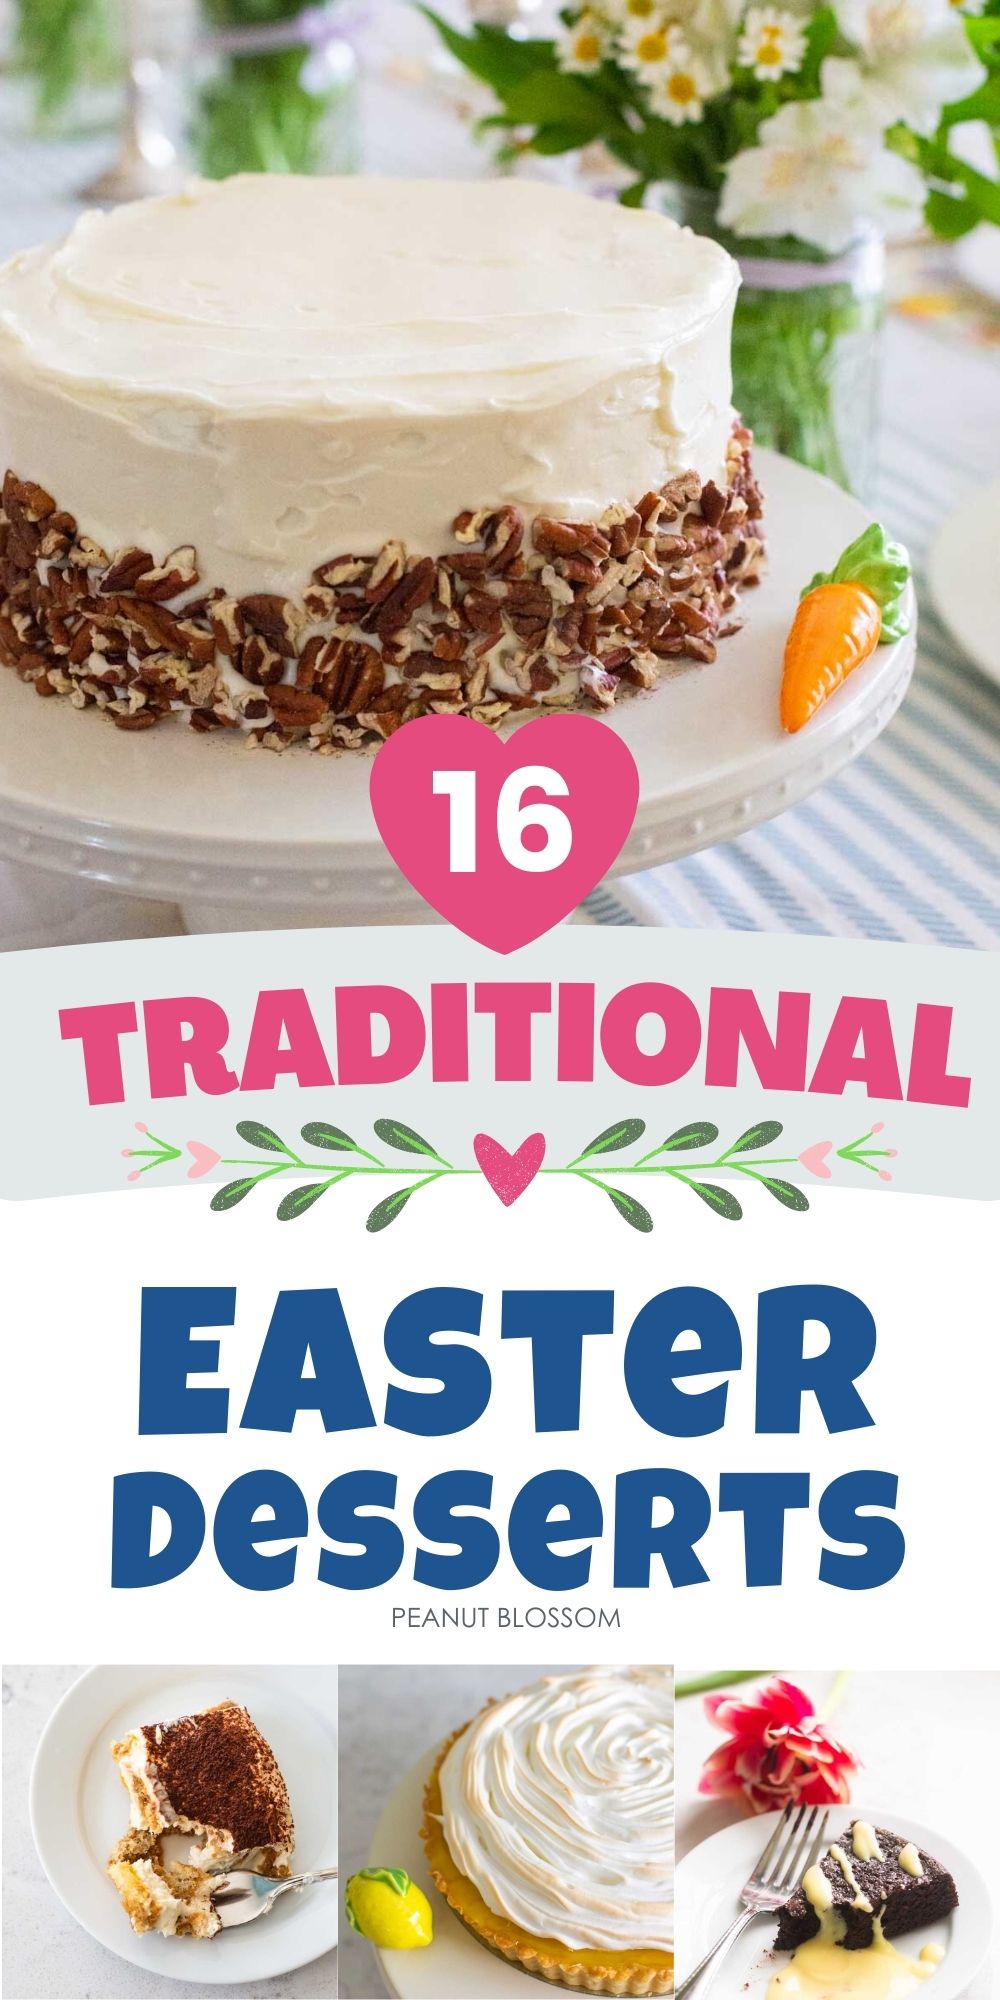 A classic carrot cake on an Easter table is featured next to 3 more easy desserts.